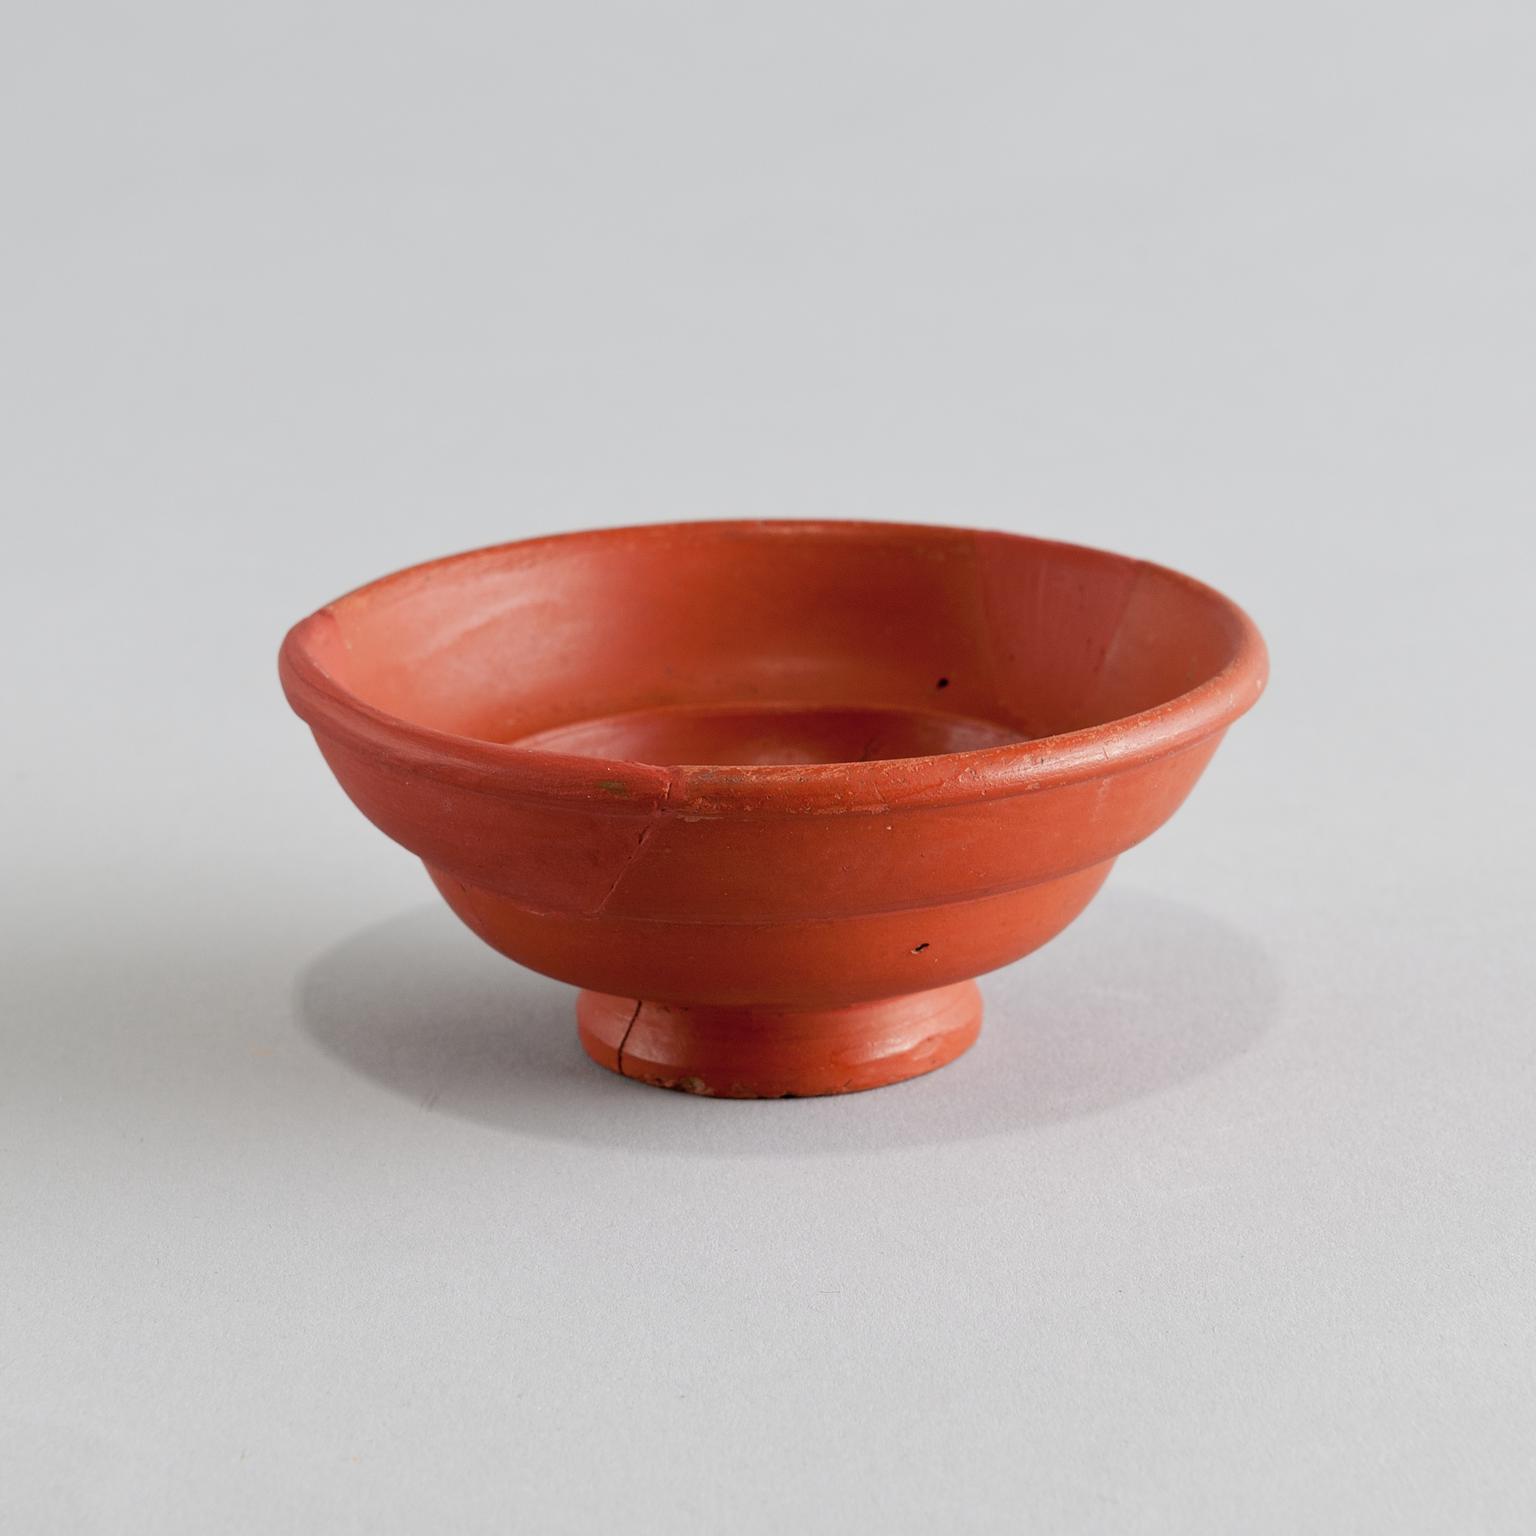 Roman samian cup, stamped